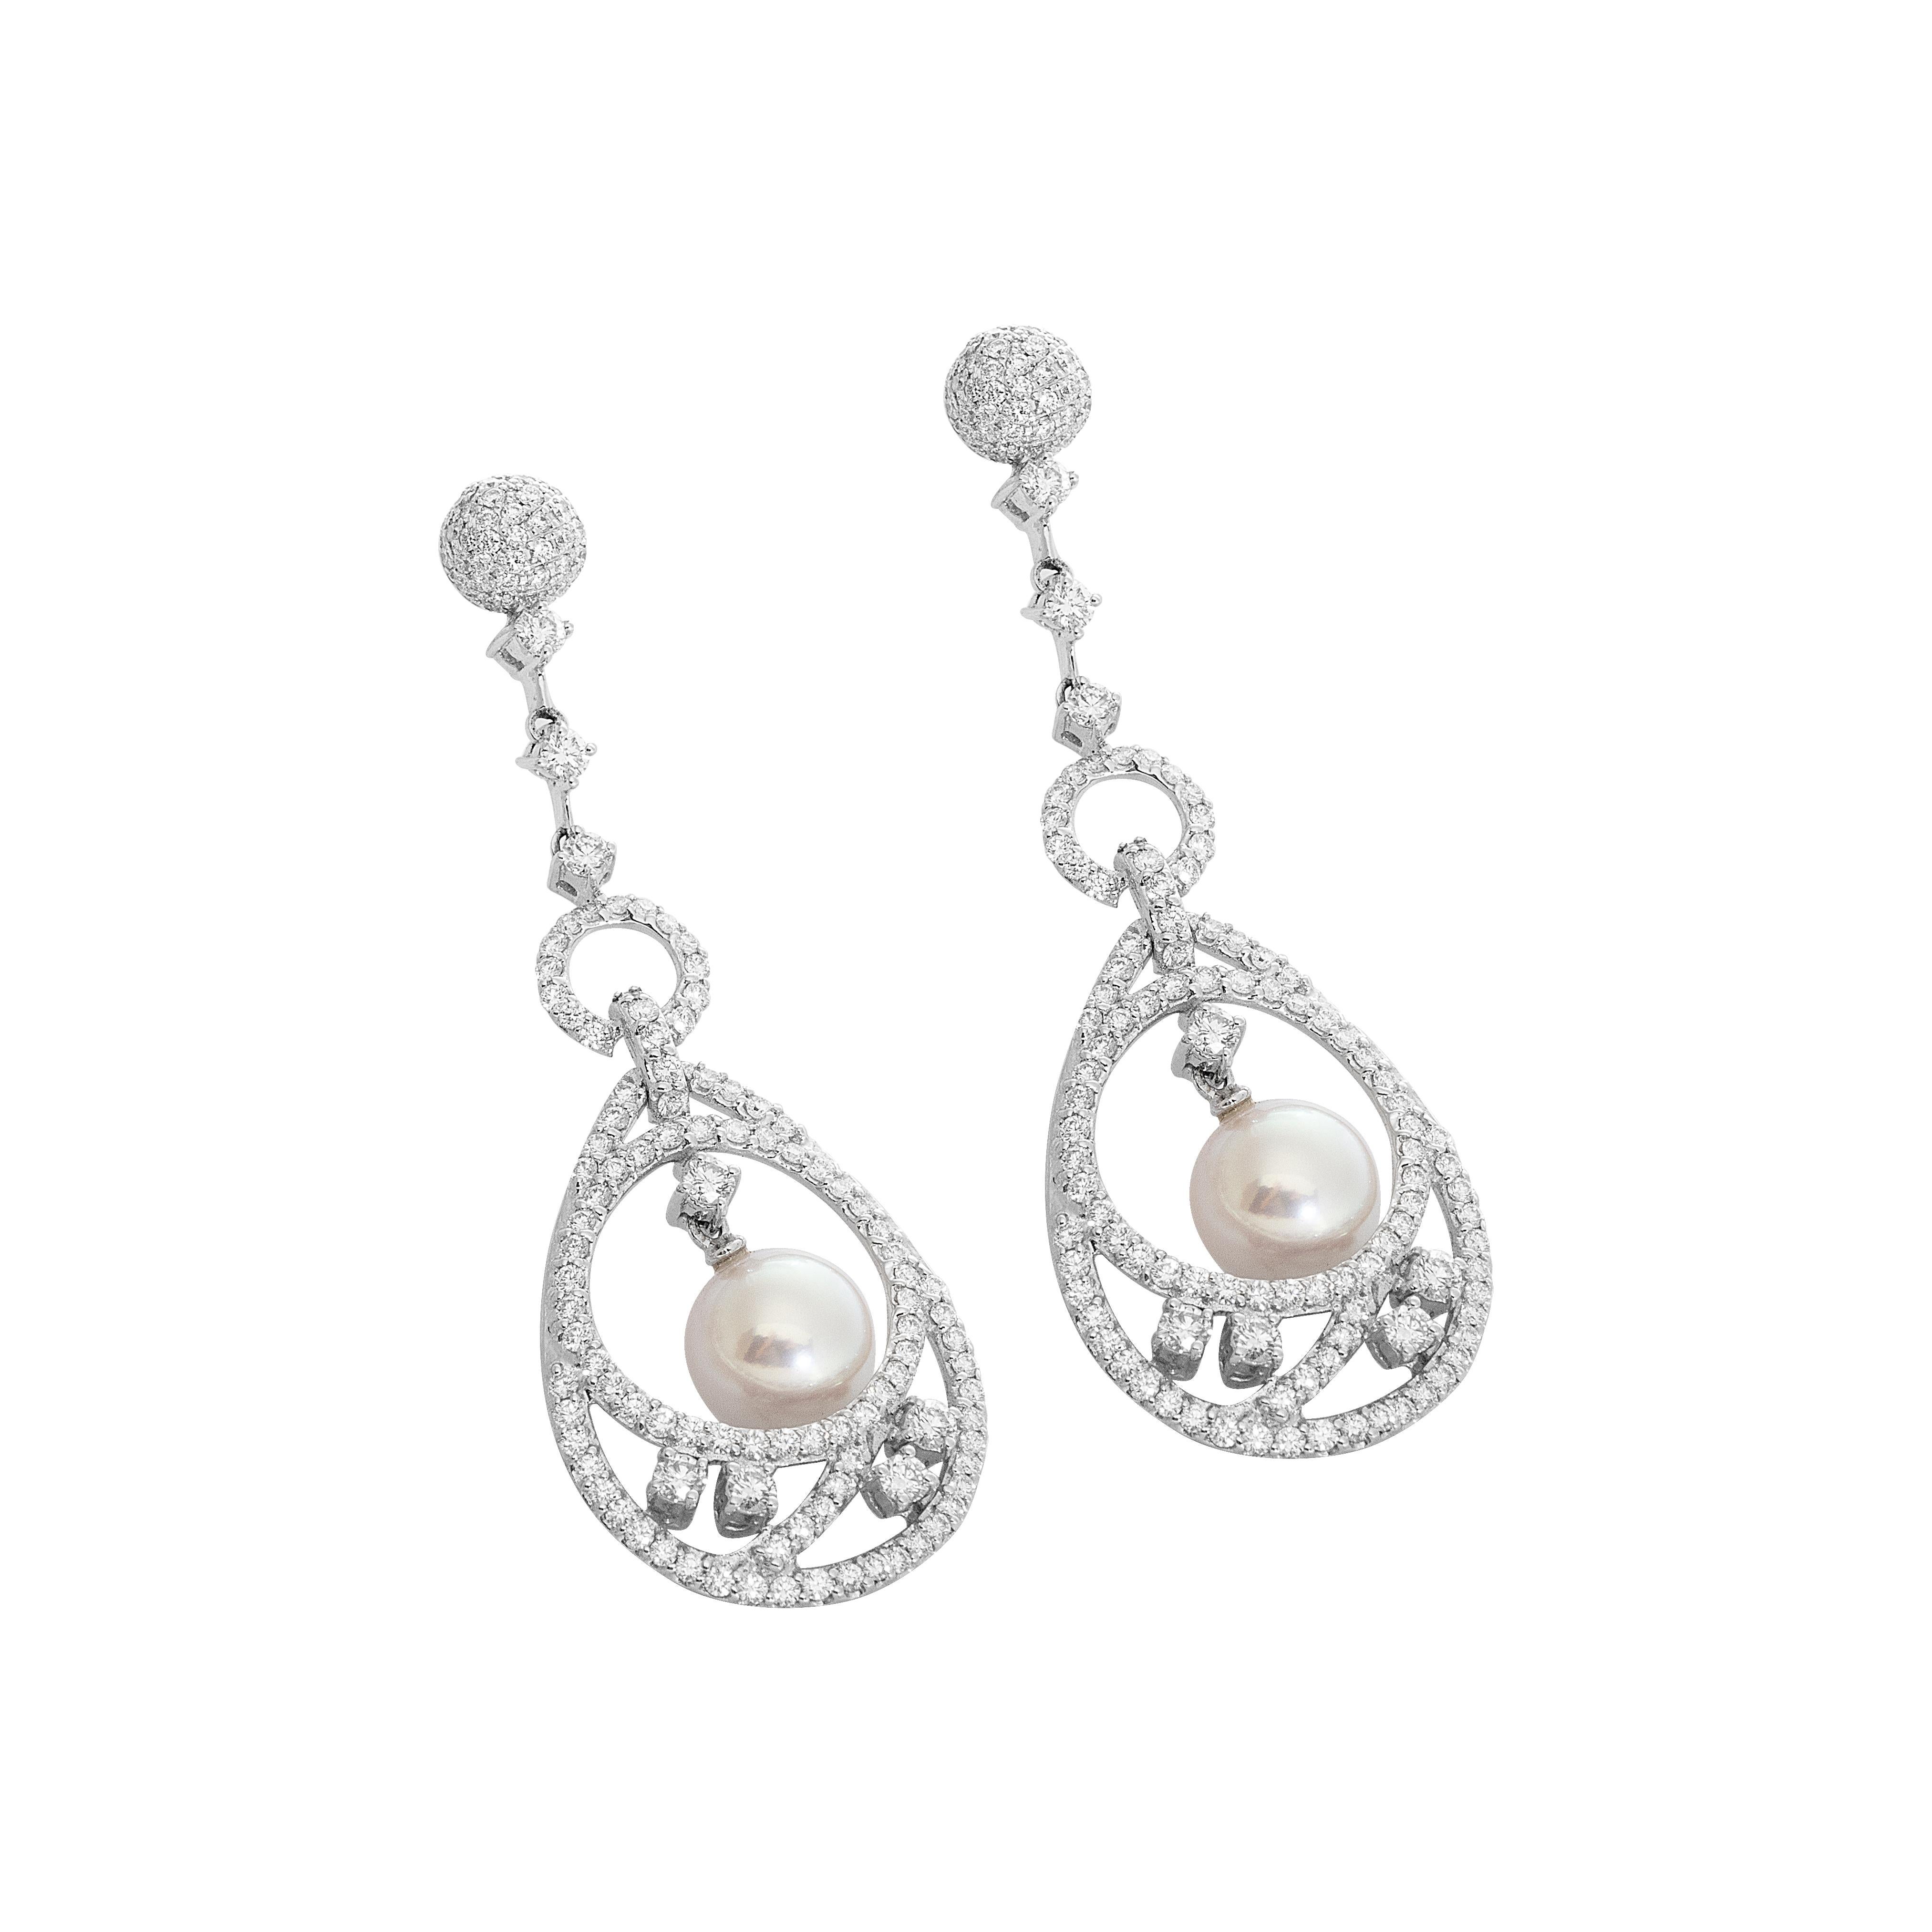 18 Karat White Gold Pearl Diamond Earrings

Light weight, and beautifully designed these gorgeous cocktail earrings set in 18 Karat white gold studded with white diamonds and lustrous pearls effortlessly dangling, are perfect for evening wear.

18